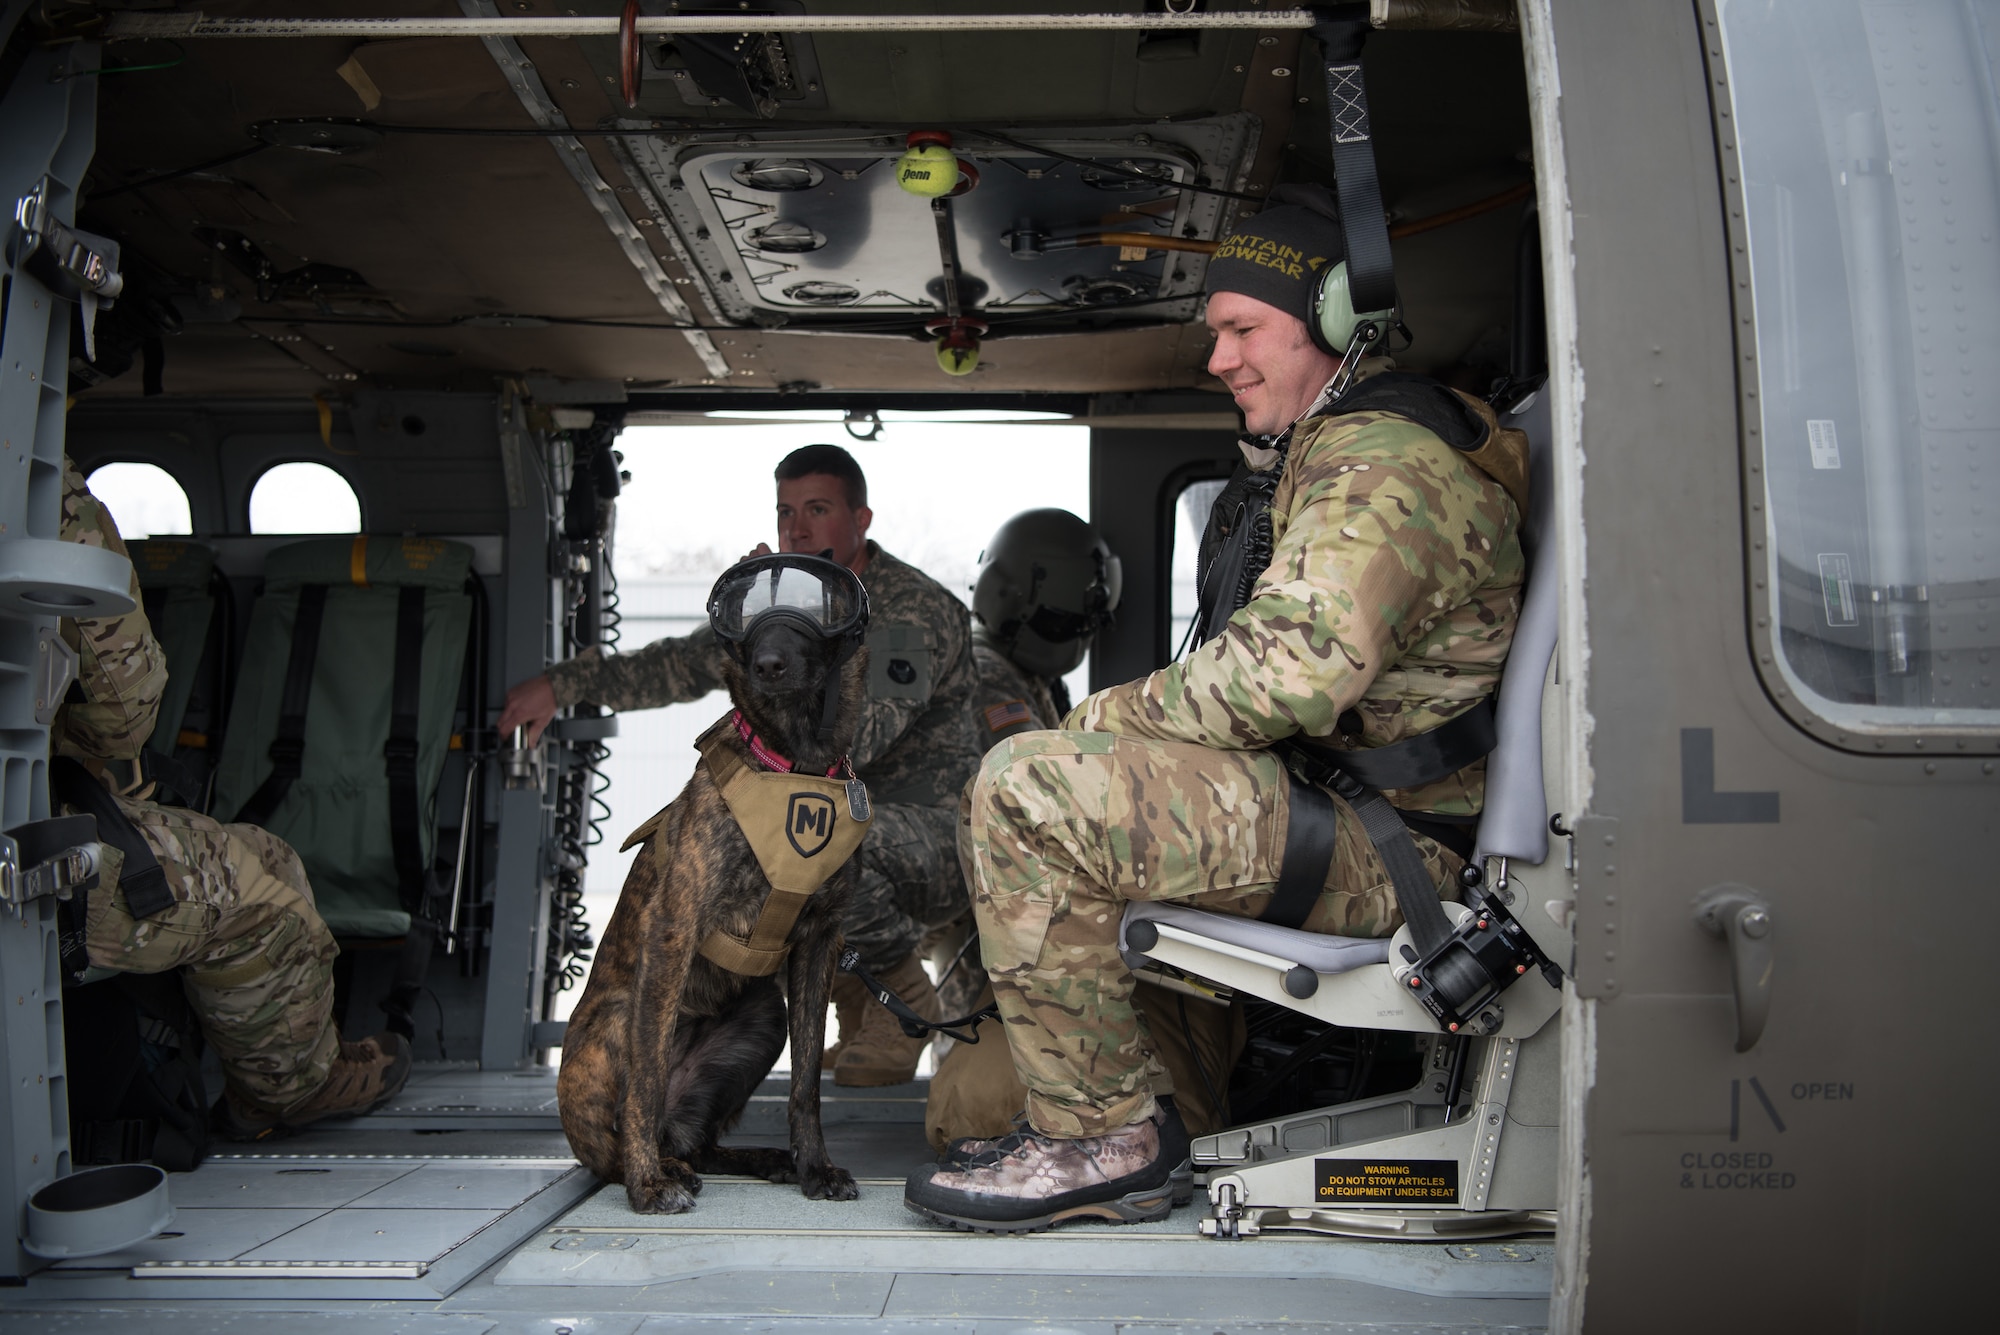 Tech. Sgt. Rudy Parsons, a pararescueman with the Kentucky Air National Guard’s 123rd Special Tactics Squadron, and his search and rescue dog, Callie, ride in a UH-60 Black Hawk helicopter as part of Callie’s familiarization training at the Boone National Guard Center in Frankfort, Ky., Nov. 29, 2018. Callie is currently the only search and rescue dog in the Department of Defense. (U.S. Air National Guard photo by Staff Sgt. Joshua Horton)